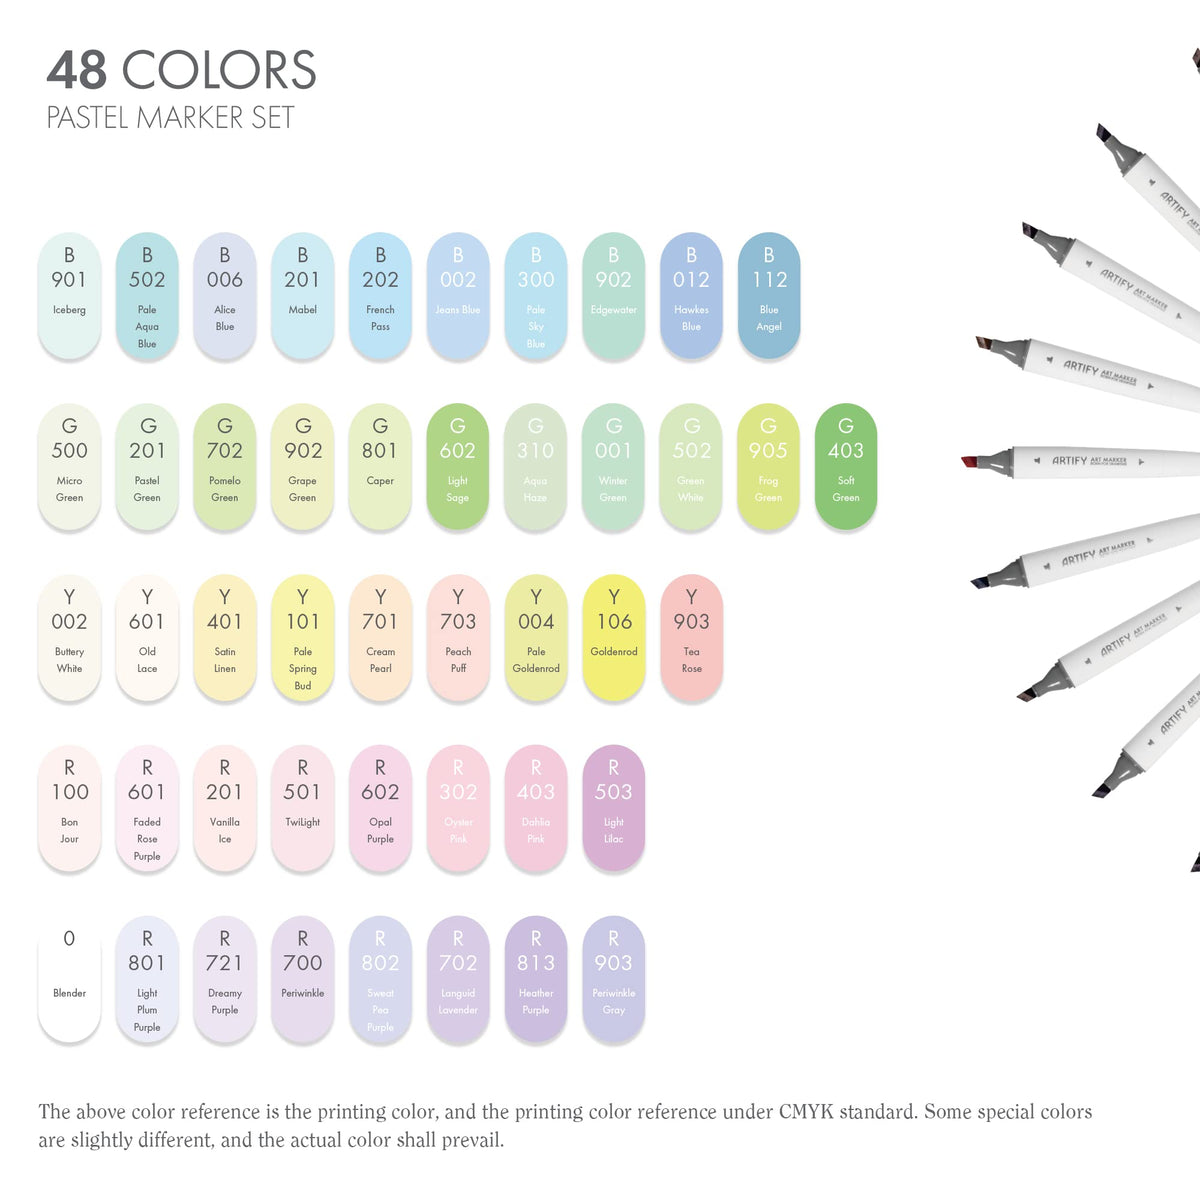 ARTIFY 108 Colors Alcohol Brush & Chisel Tips Markers - Gift